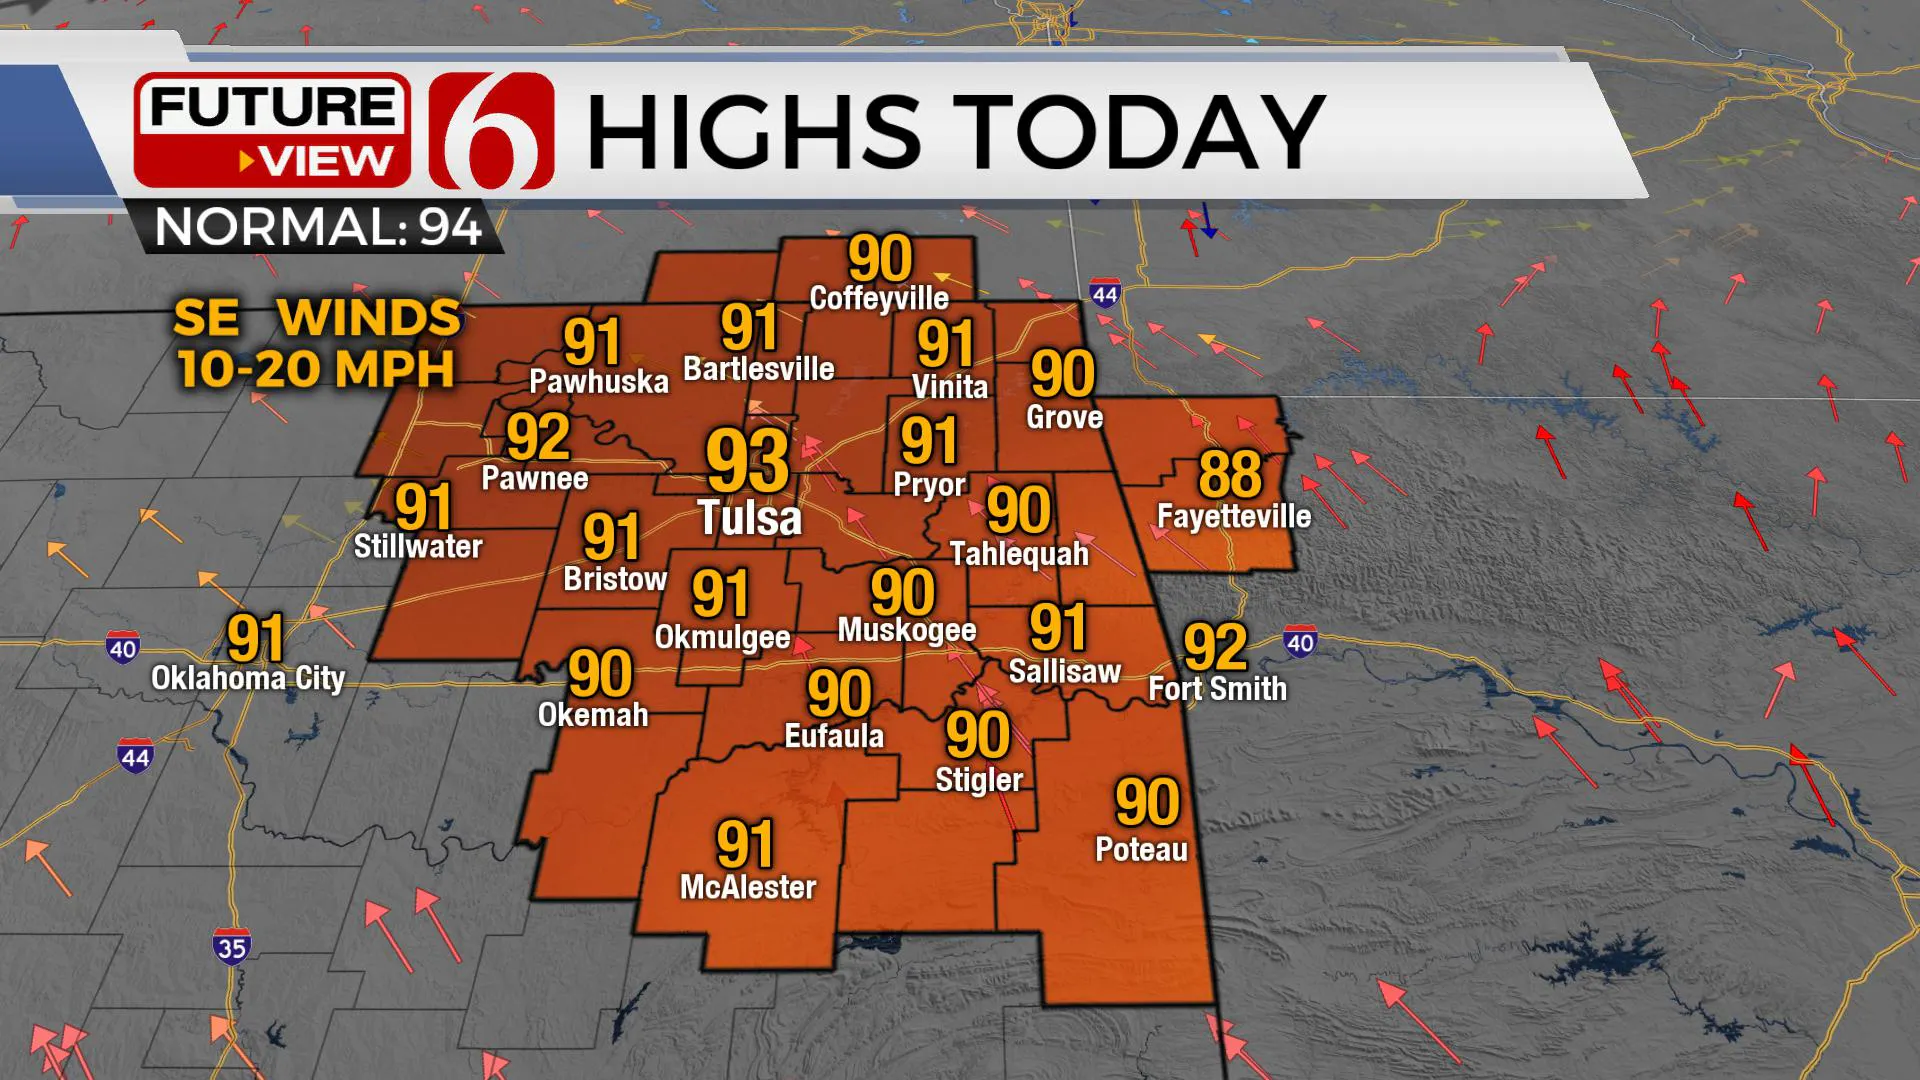 Highs For Today